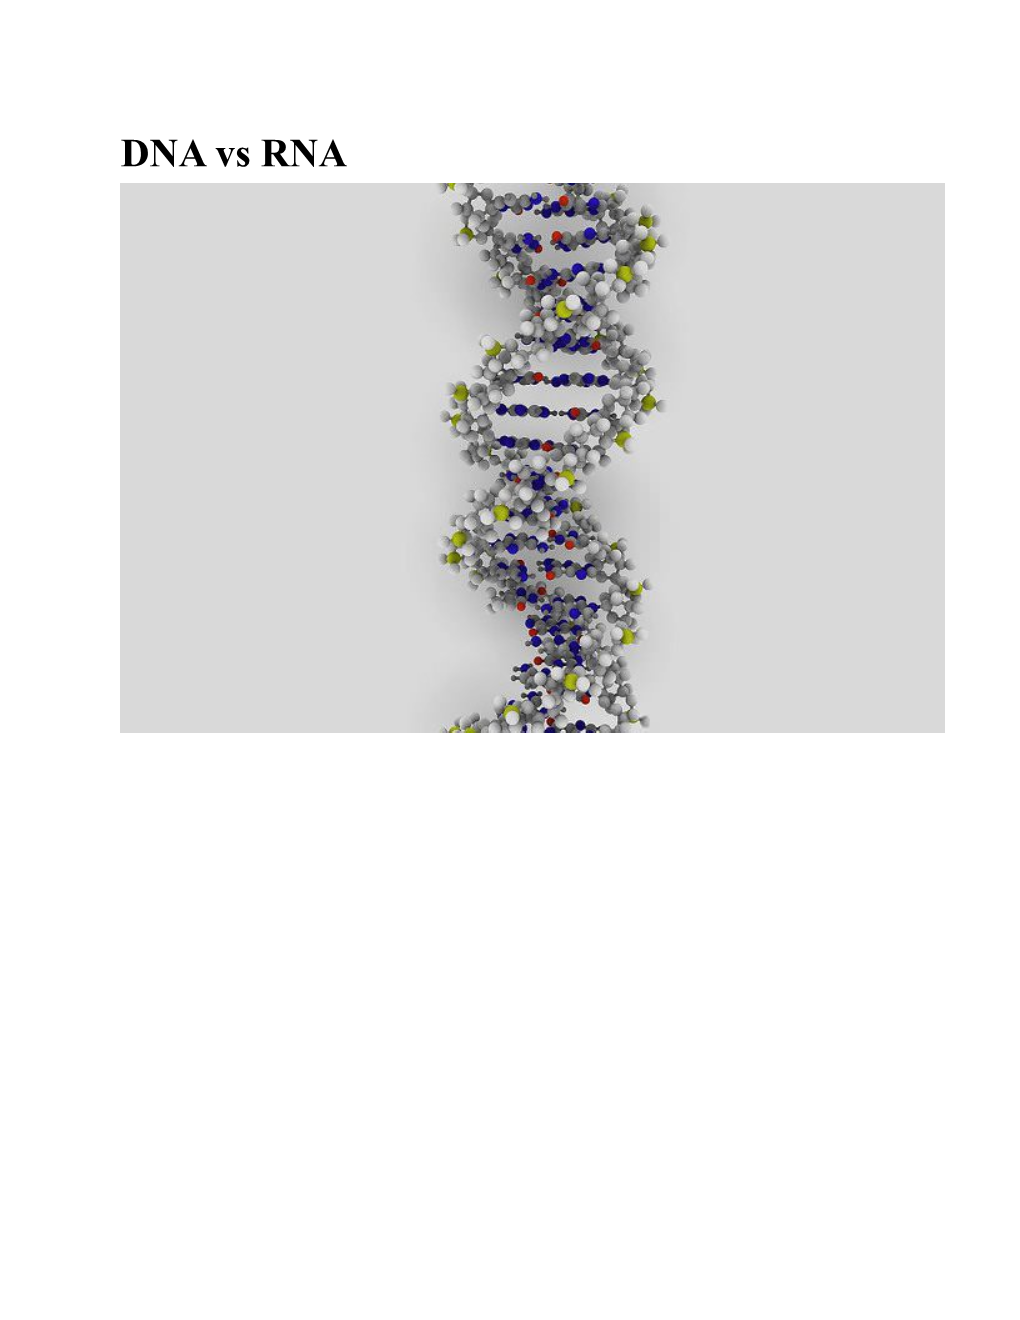 The Main Difference Between DNA and RNA Is the Sugar Present in the Molecules. While The